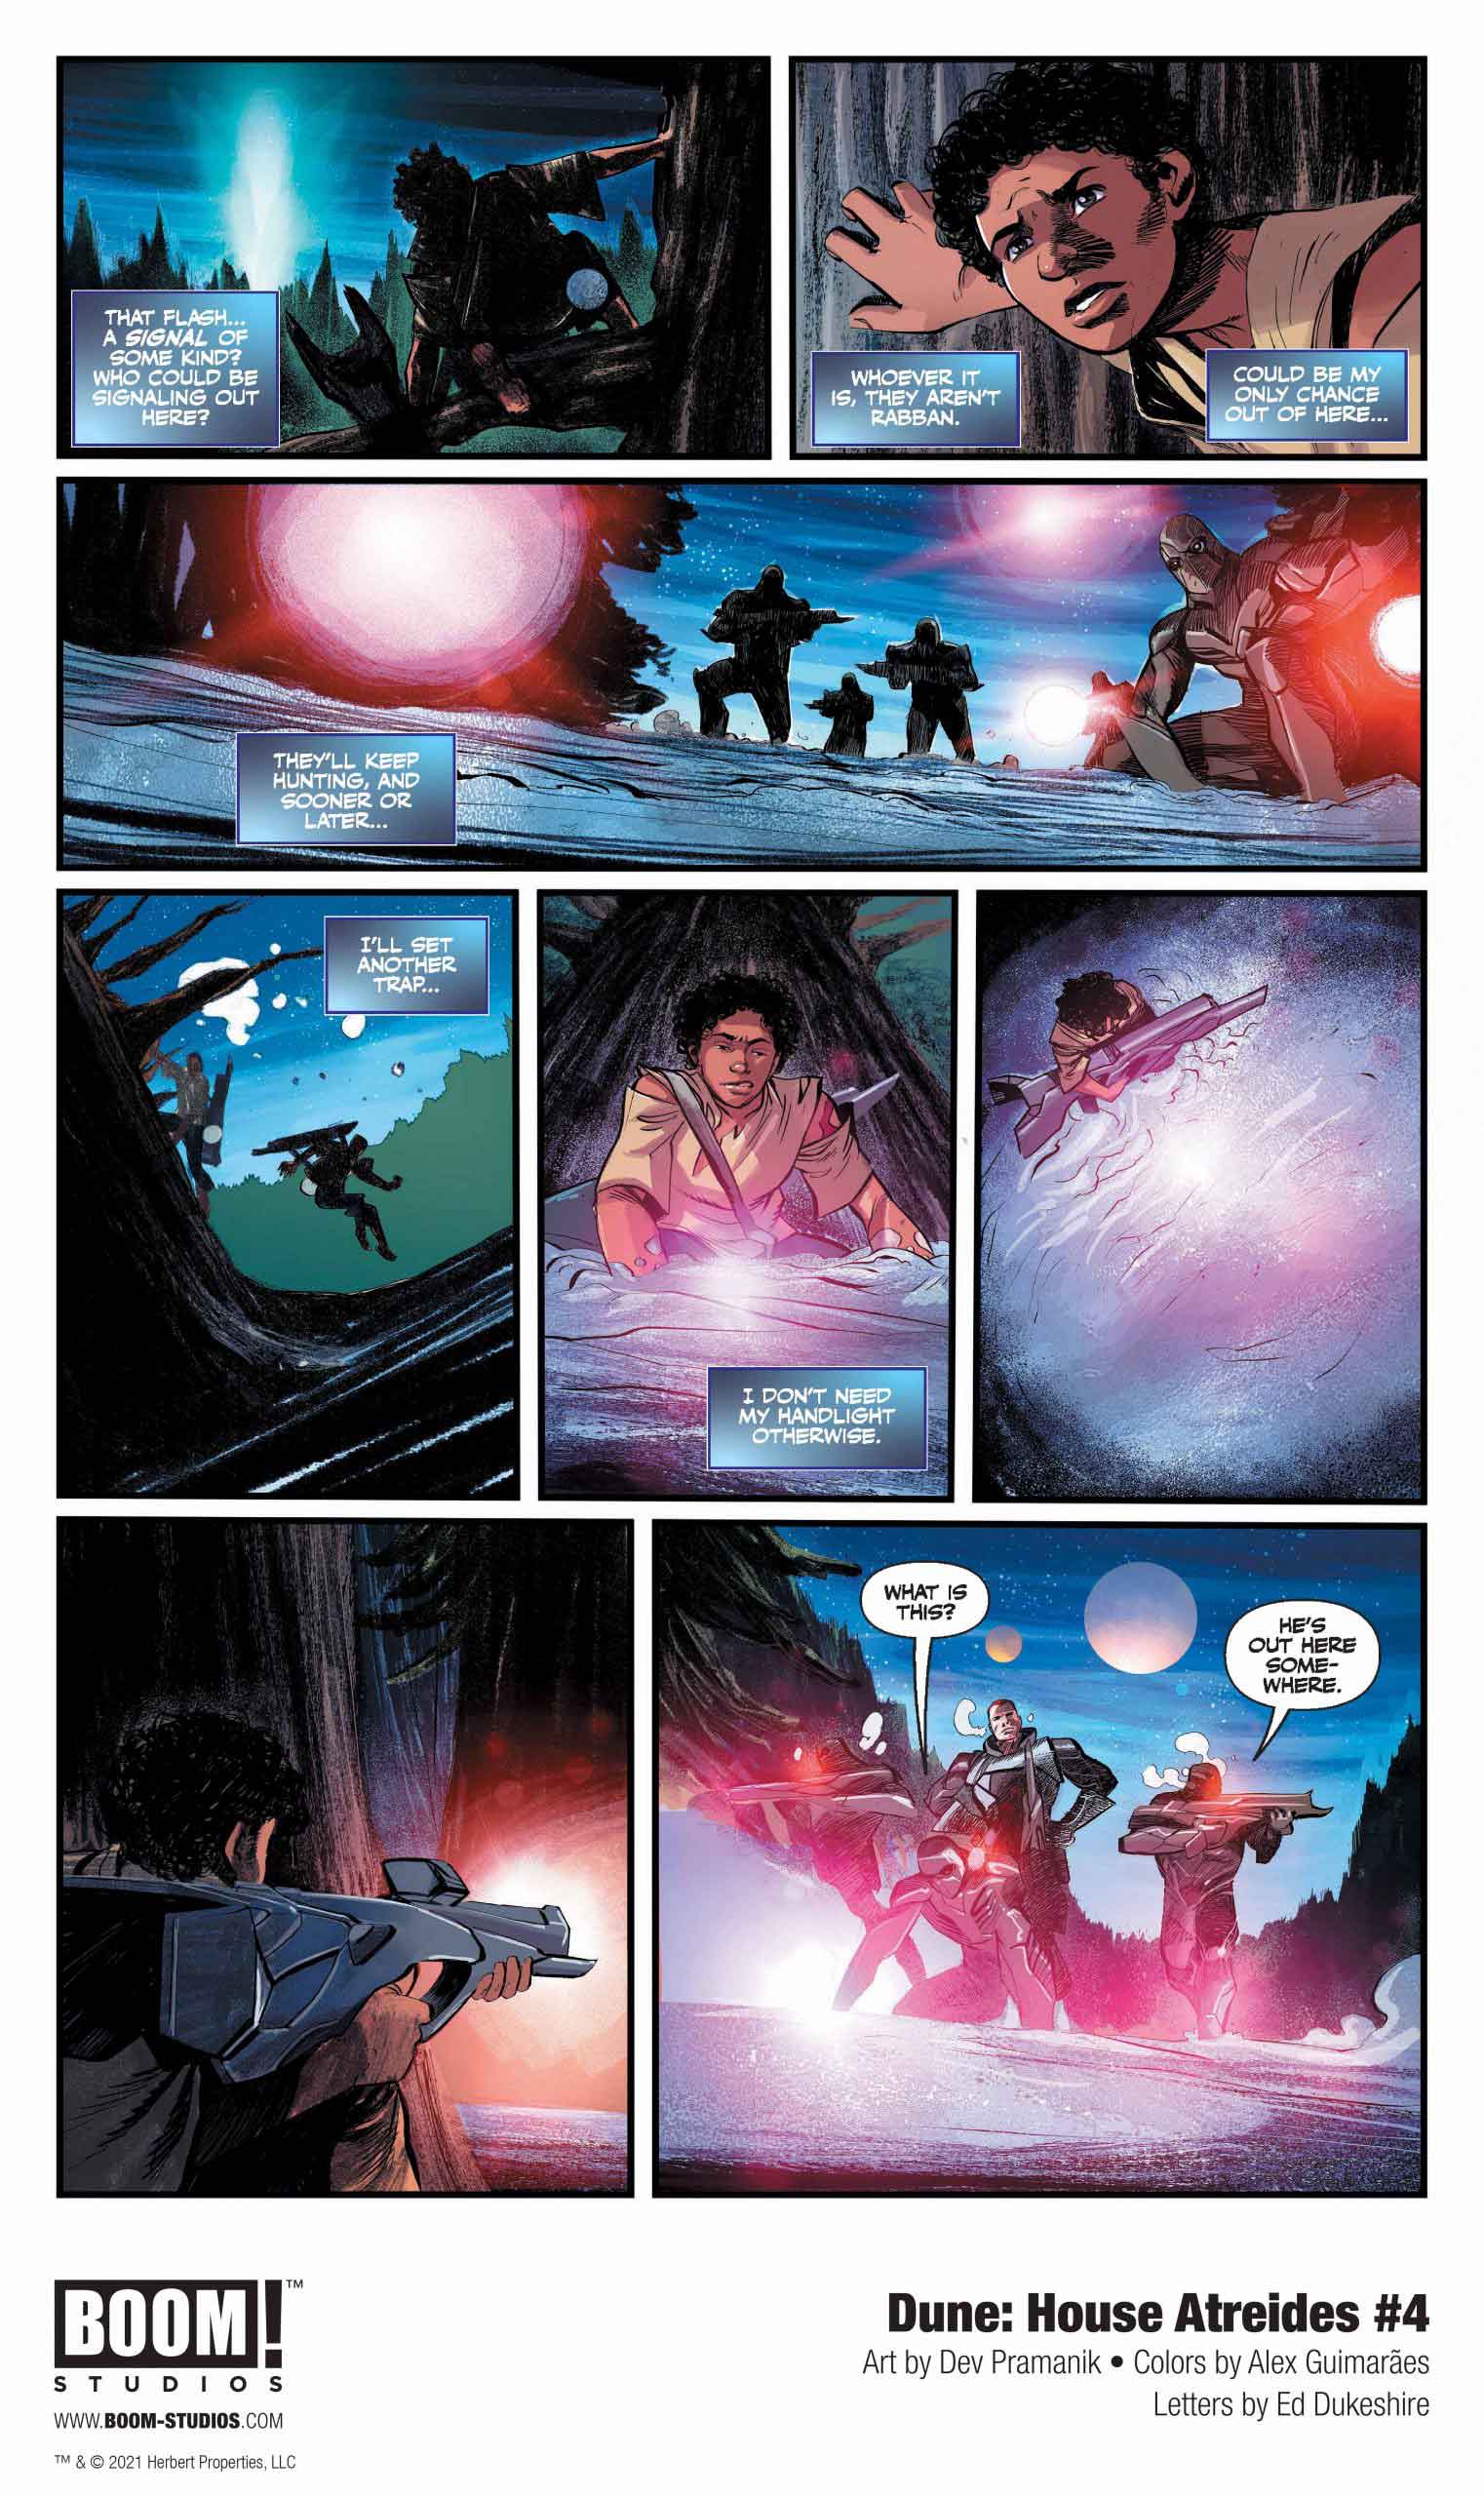 Dune: House Atreides comic series. Issue #4, preview page 3.